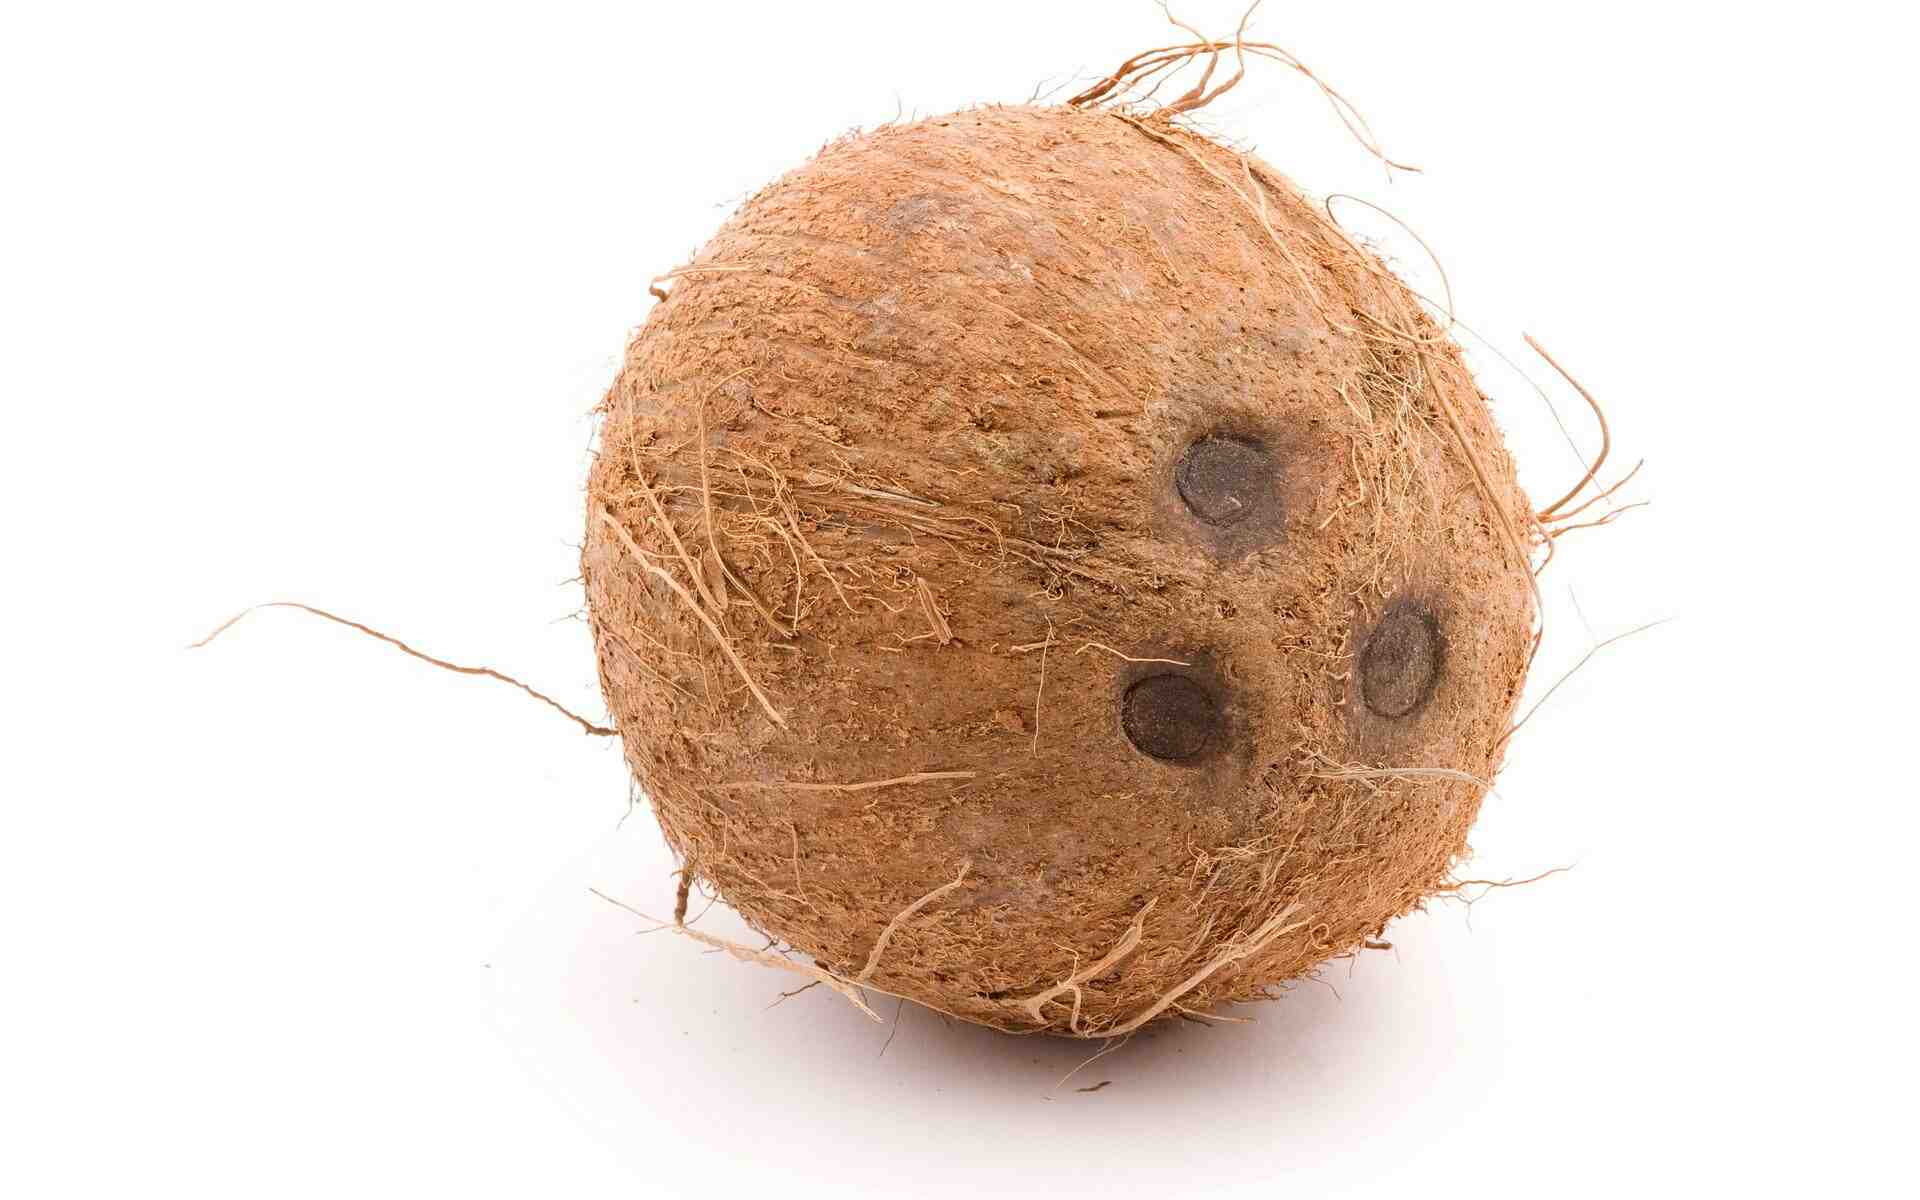 Why does a coconut have 3 holes?